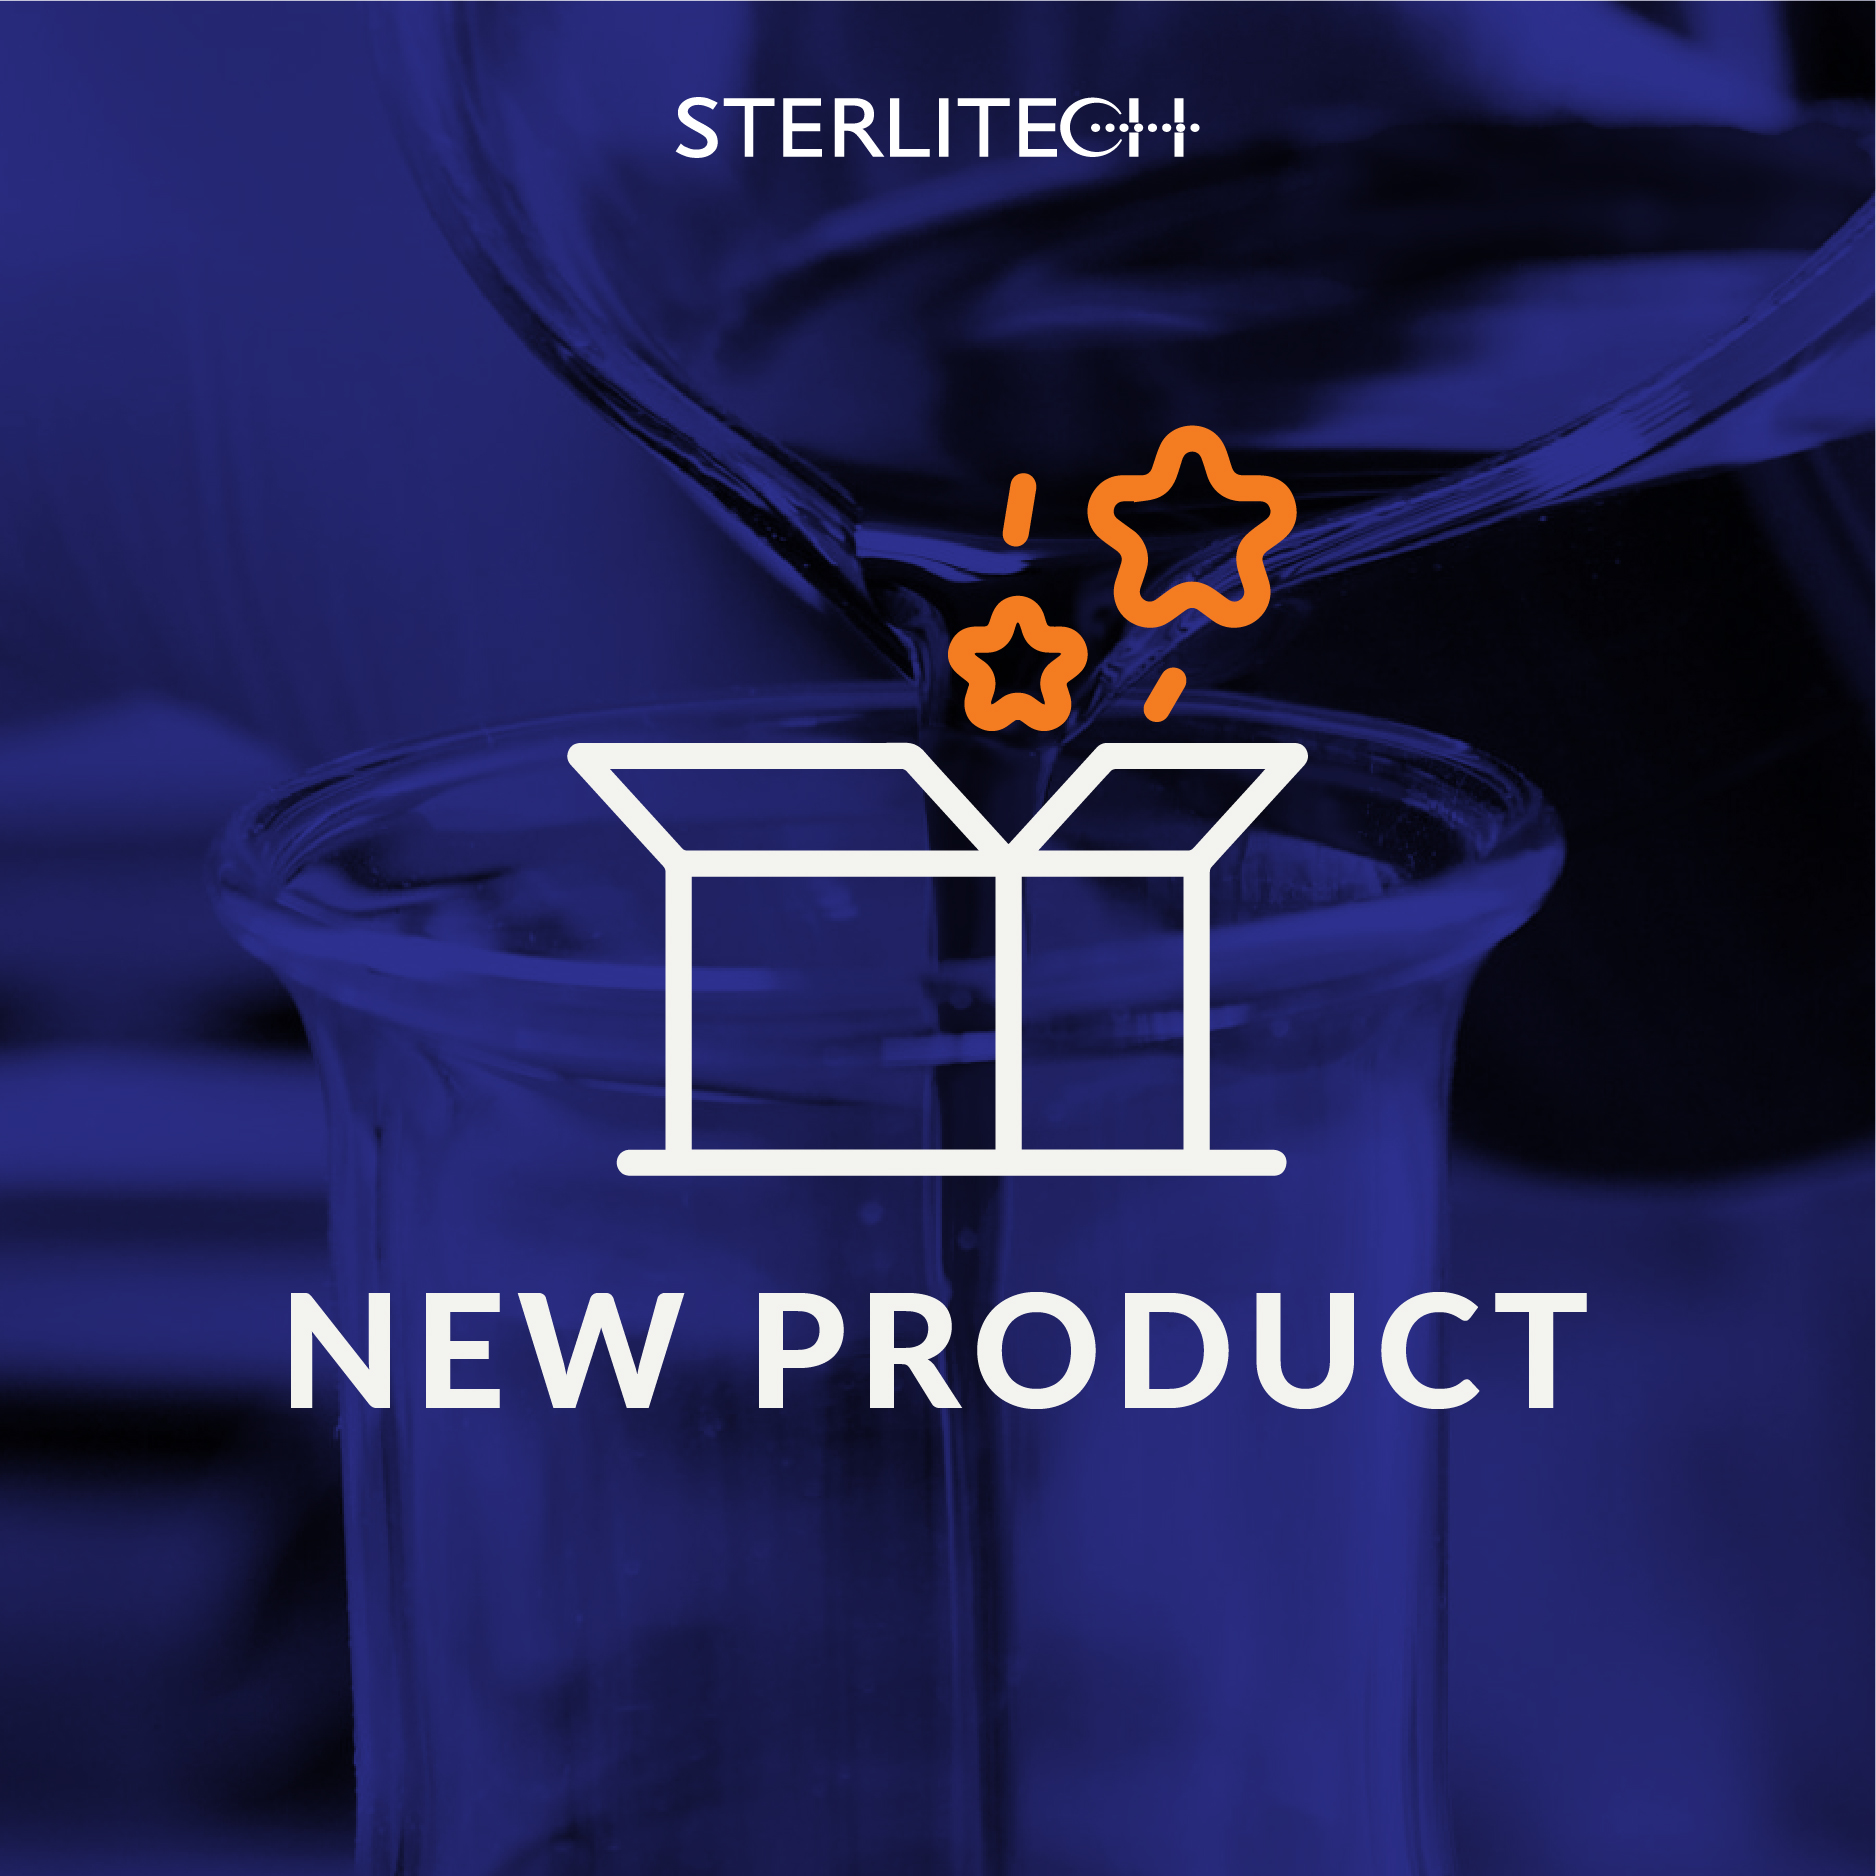 Synder Membranes Added to Sterlitech's Flat Sheet Listings